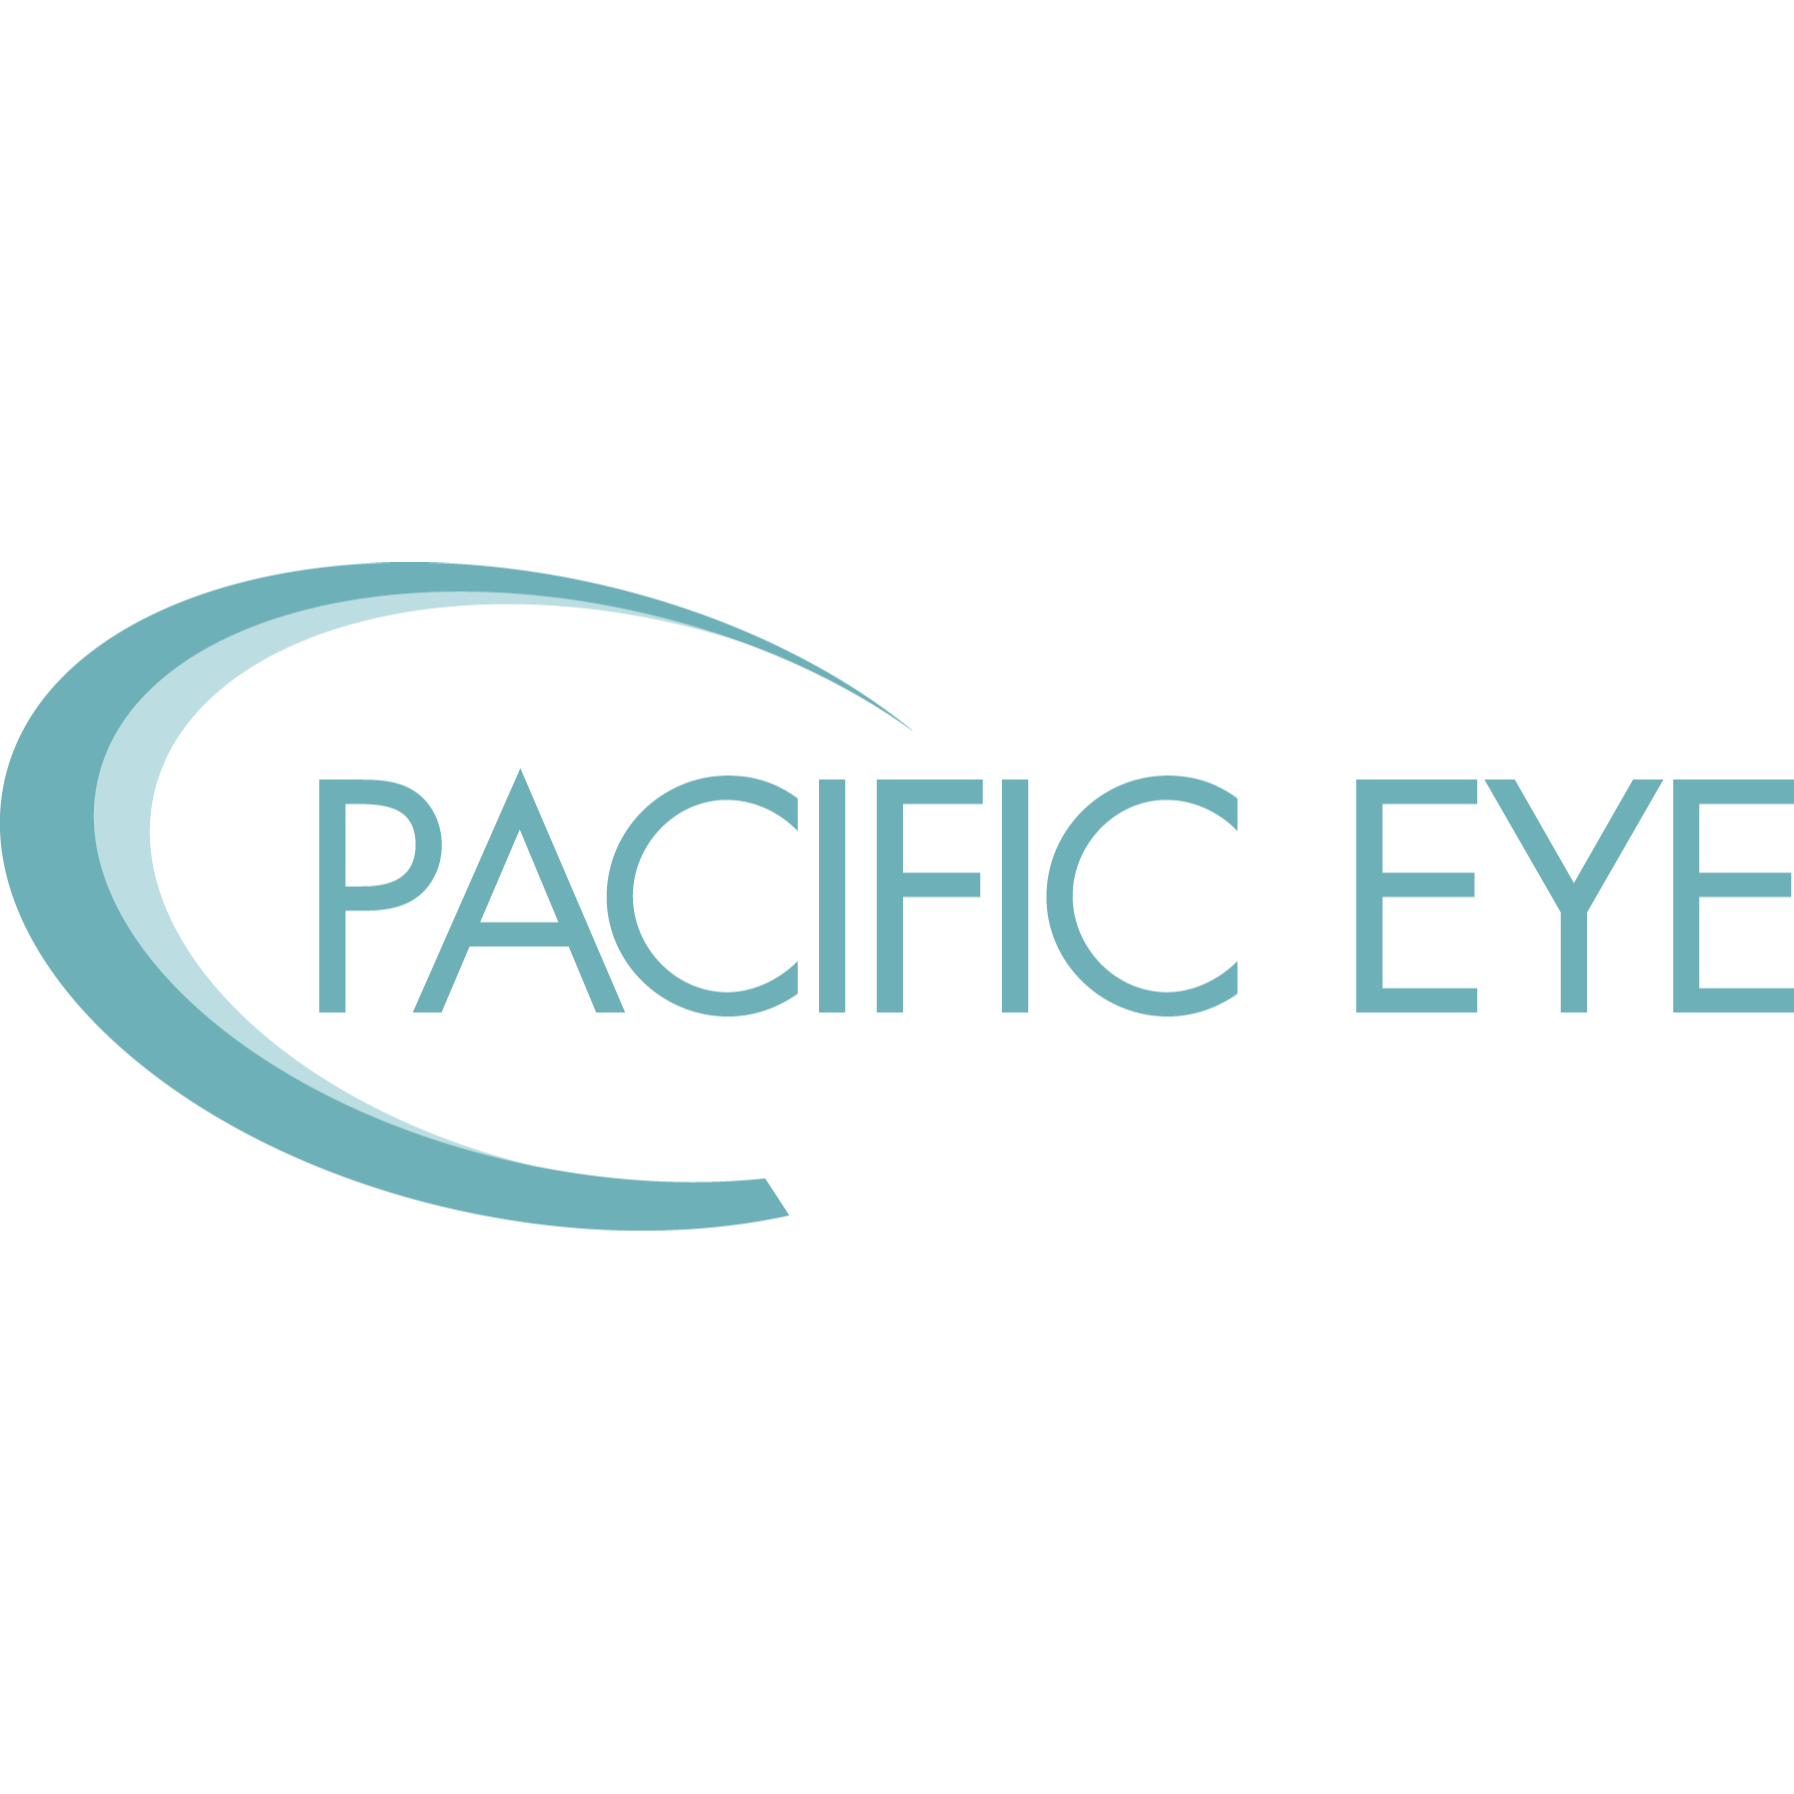 Pacific Eye - Orcutt